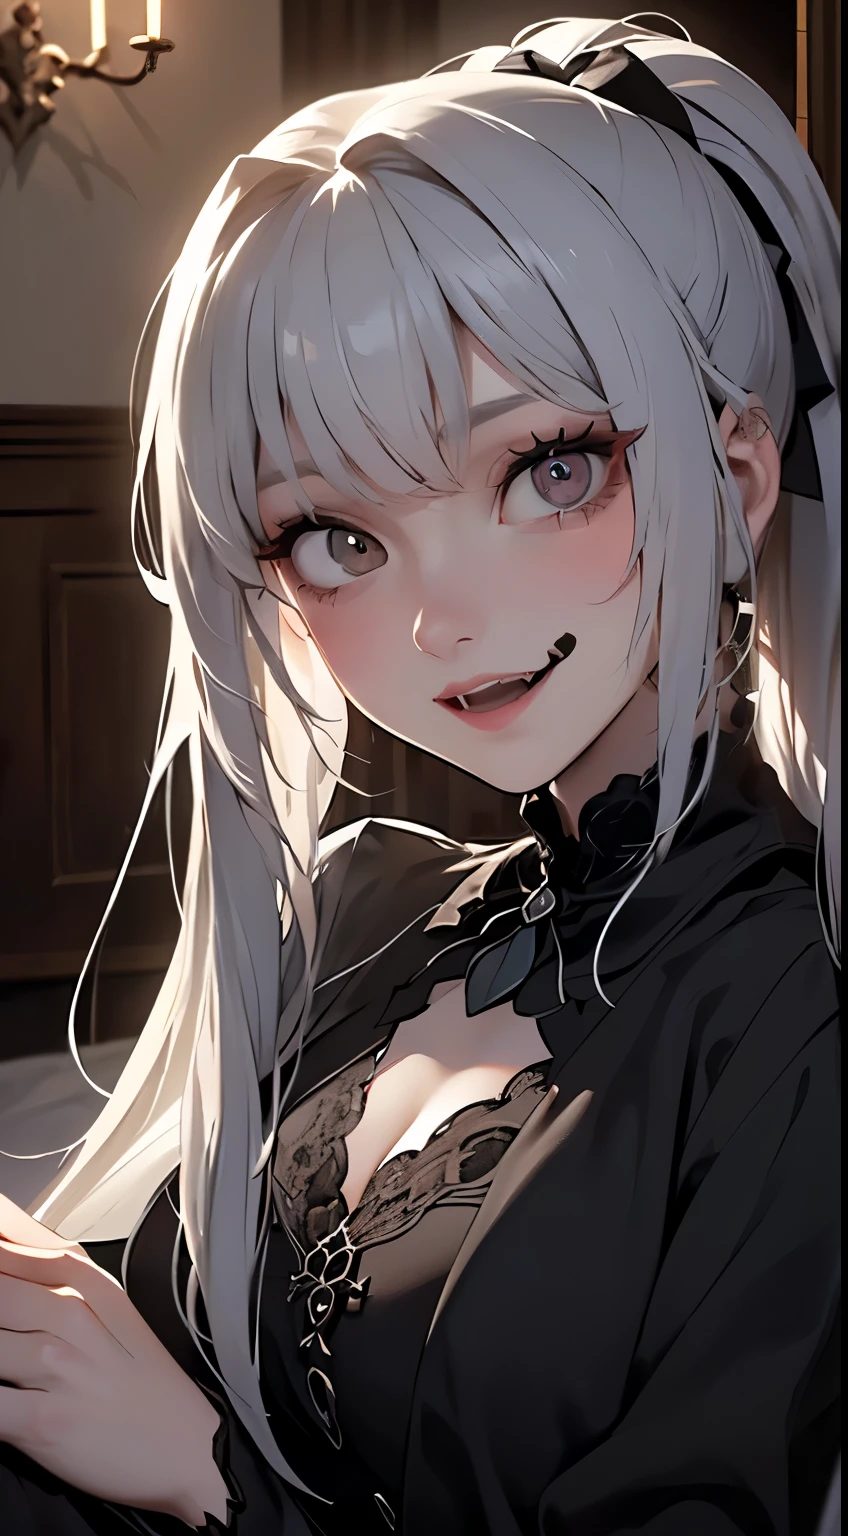 The lighting is very dim、Cinematic Lighting Effects、Her face is clearly visible、(((Huge very dark old gothic bedroom)))、(((He is smiling with his eyes shining and showing two long, sharp fangs.)))、1girl,、Silver-haired hair、Ponytail with bangs、(((vampire)))、(((((Abnormally long incisors)))))、She has a very beautiful face、Because it&#39;s tight、Big and beautiful eyeid-chest、(((In underwear)))、Detailed depiction of the transparency and wrinkles of the ultra-thin underwear material、Detailed depiction of the beauty of hair、Detailed depiction of blue eye sparkle、Girl squatting and spreading her legs、Super excited girl、、A large, clean, white bed、